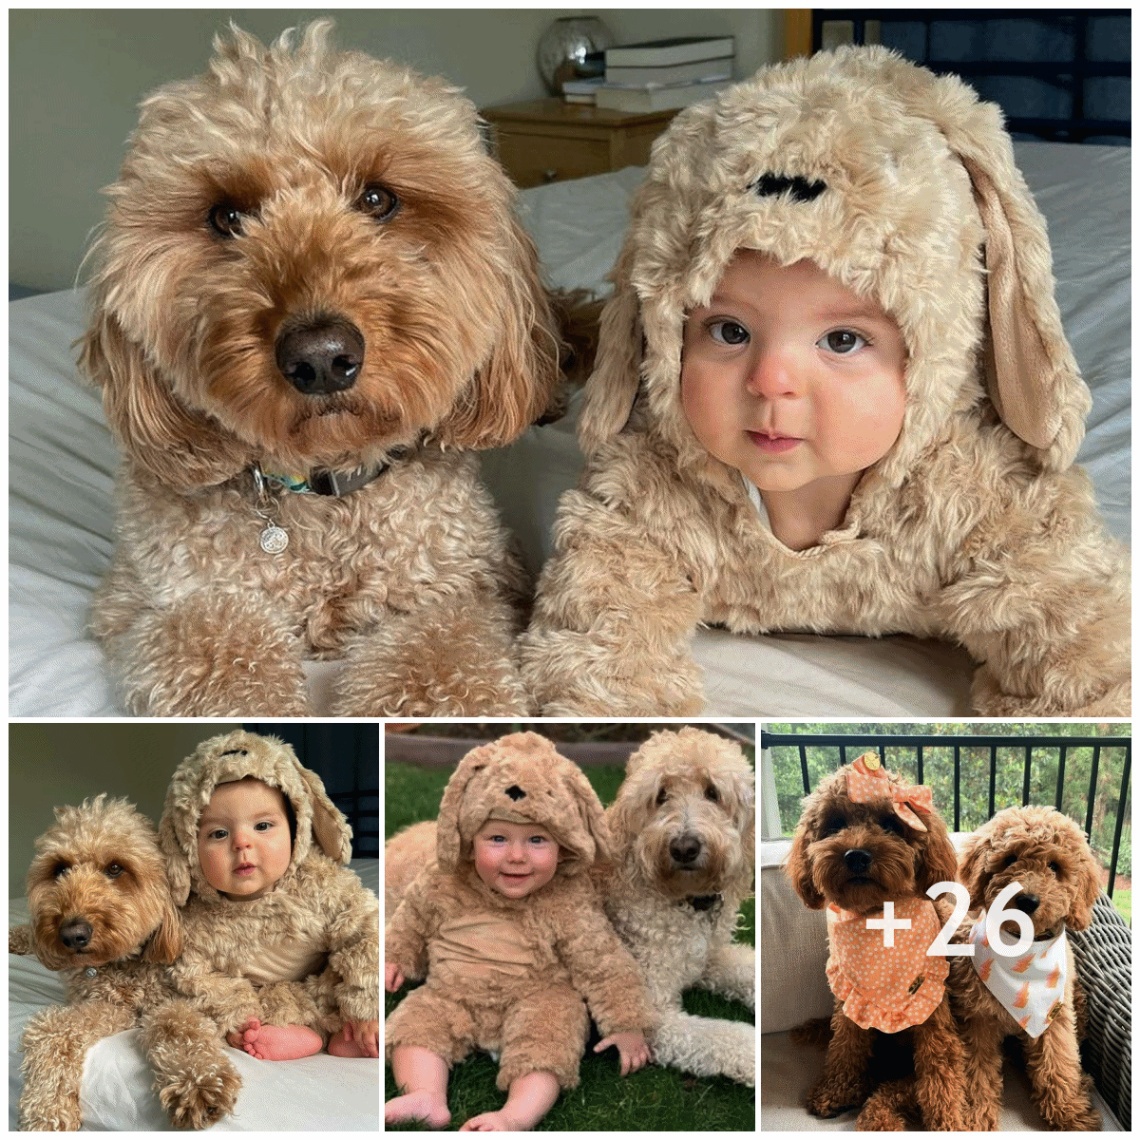 Perfect Companions: Dog and Baby, Best Friends with Similar Fur, Growing Happily Together